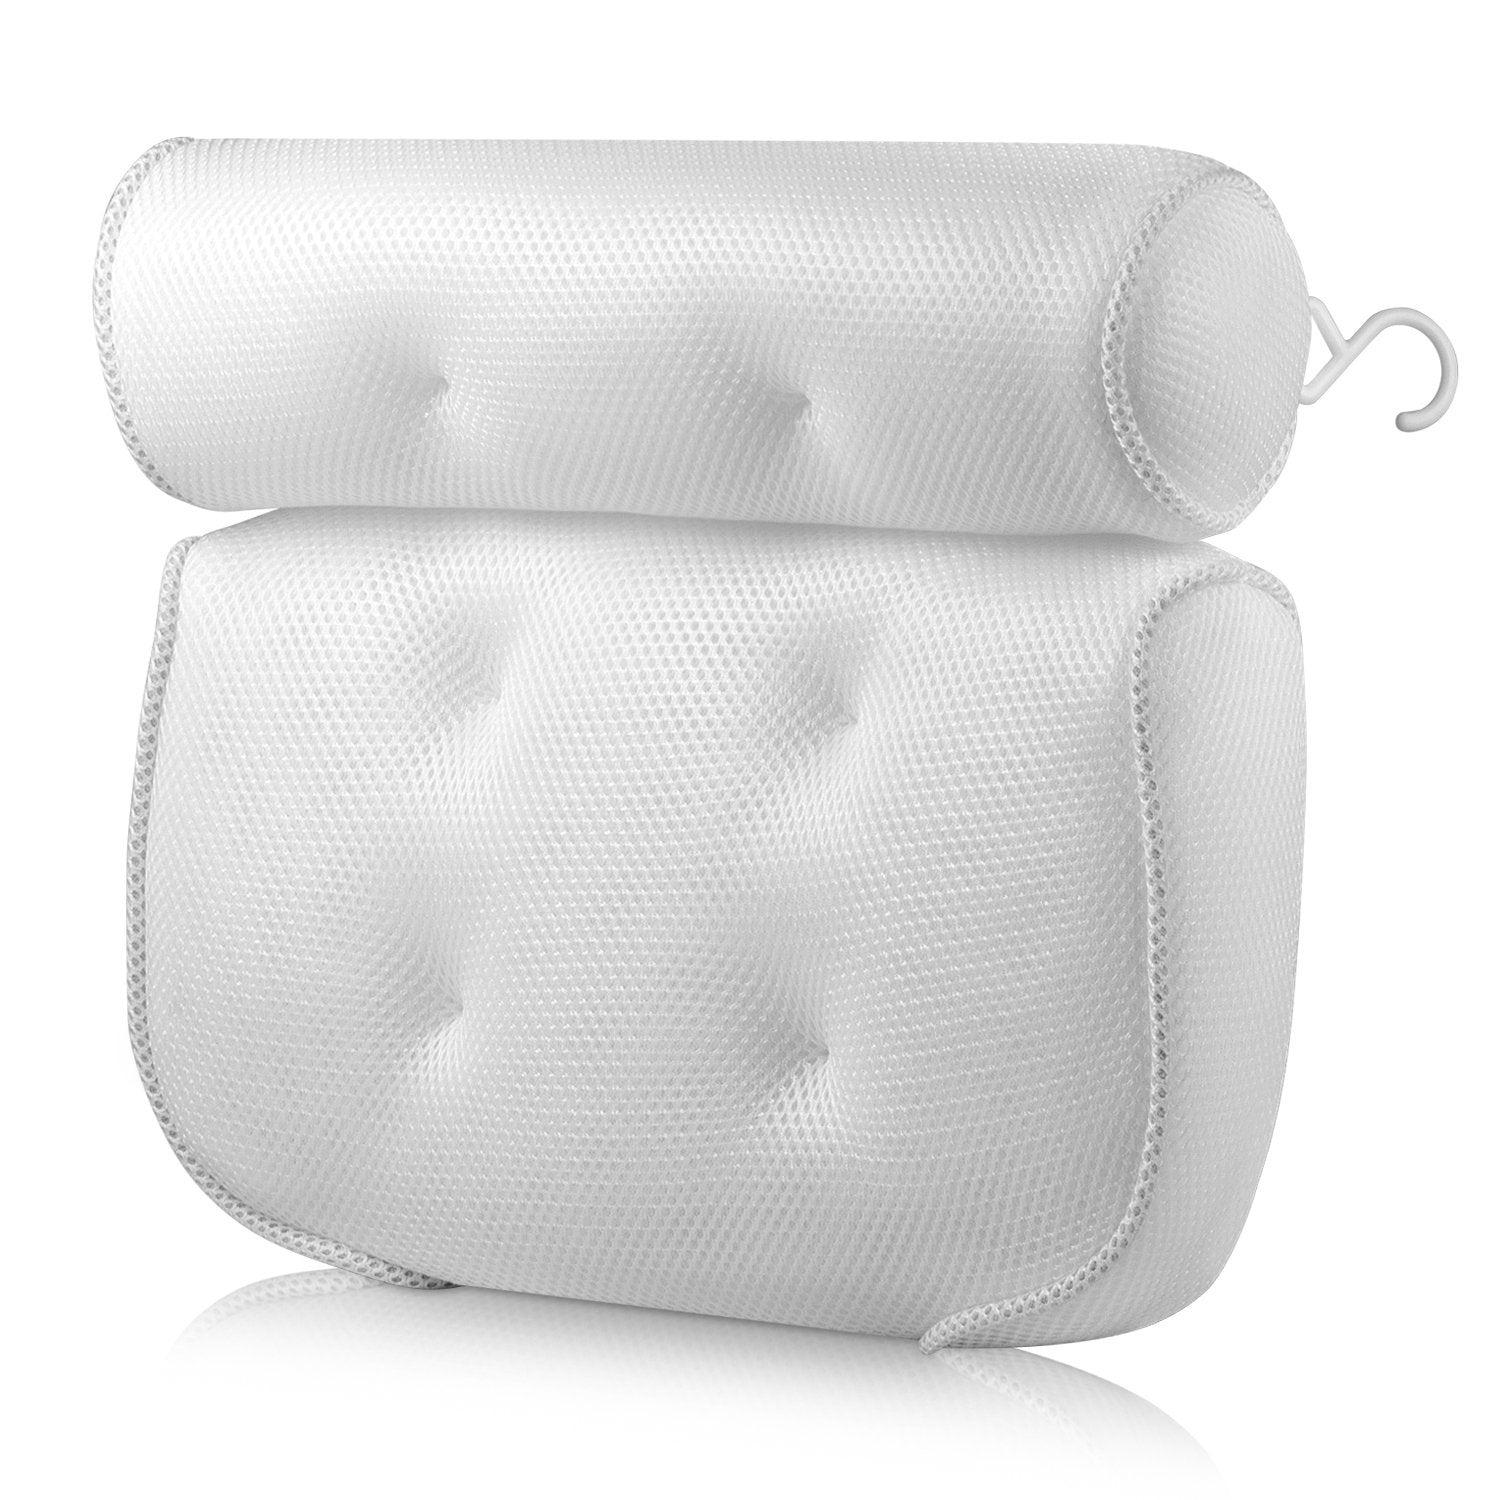 Bath Pillow for Bathtub - Soft Support for Neck, Head and Back – Wonderly